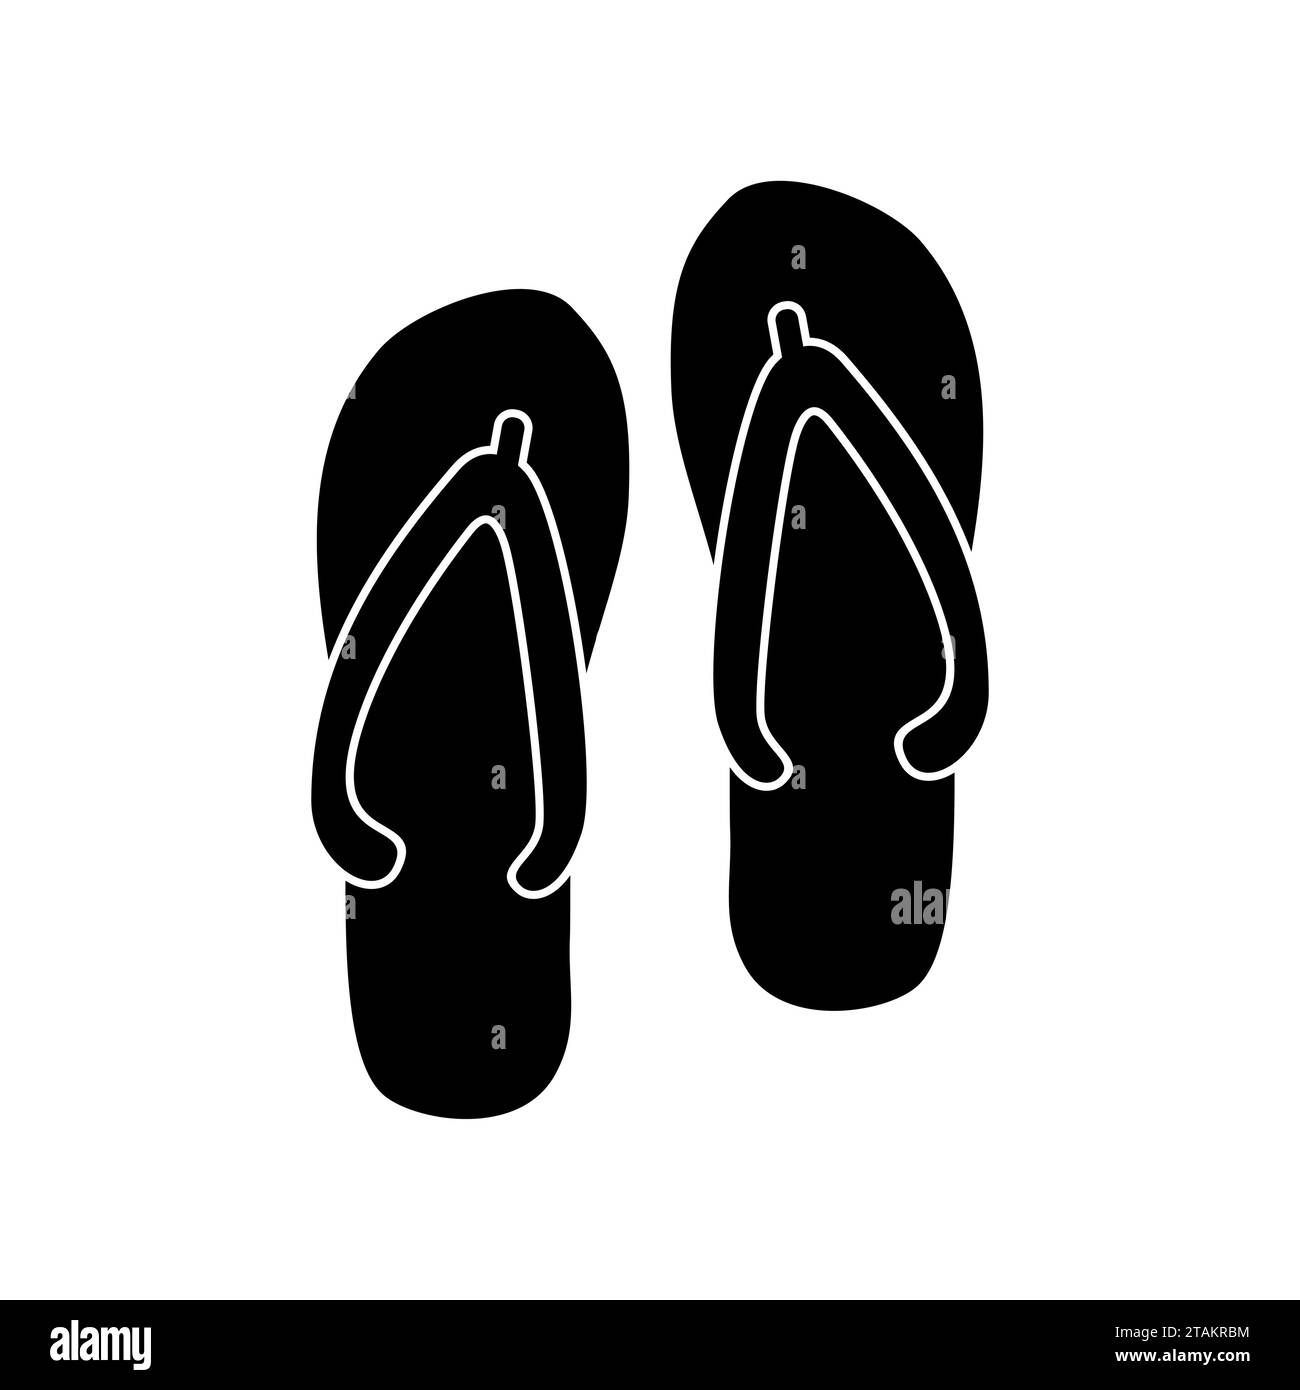 Yellow flip flop Black and White Stock Photos & Images - Alamy